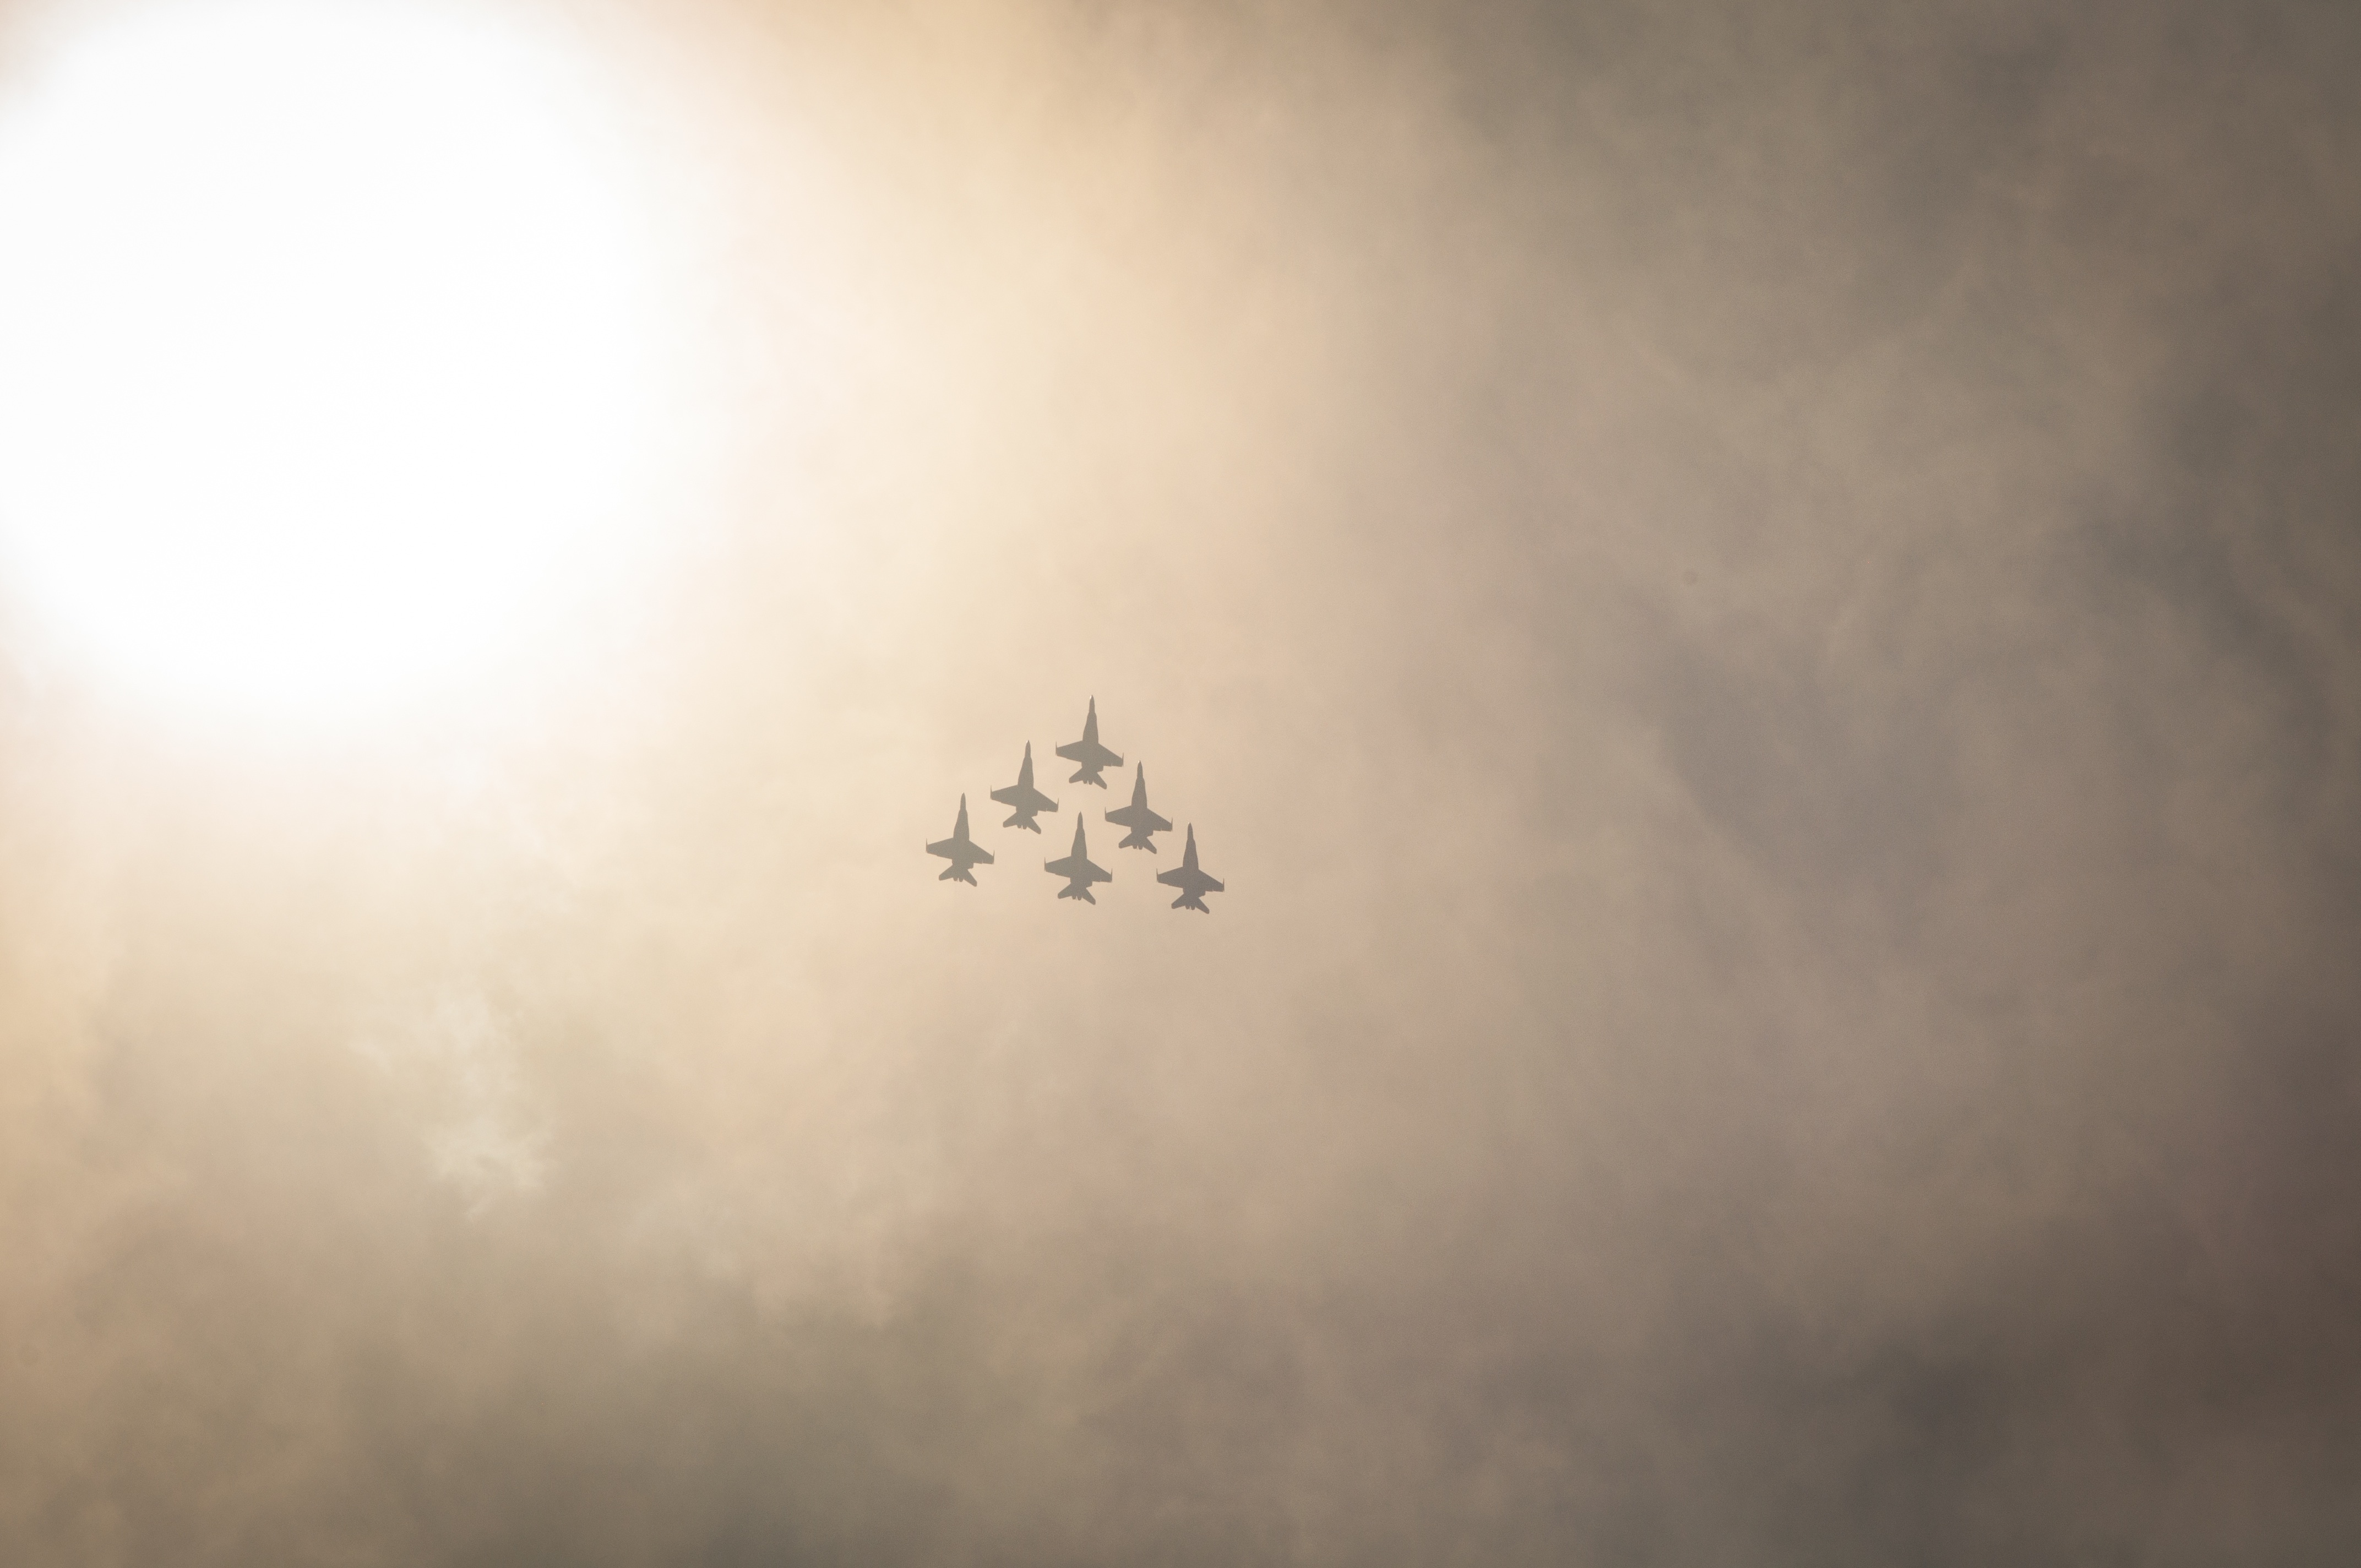 Six military aircraft flying in the sky.